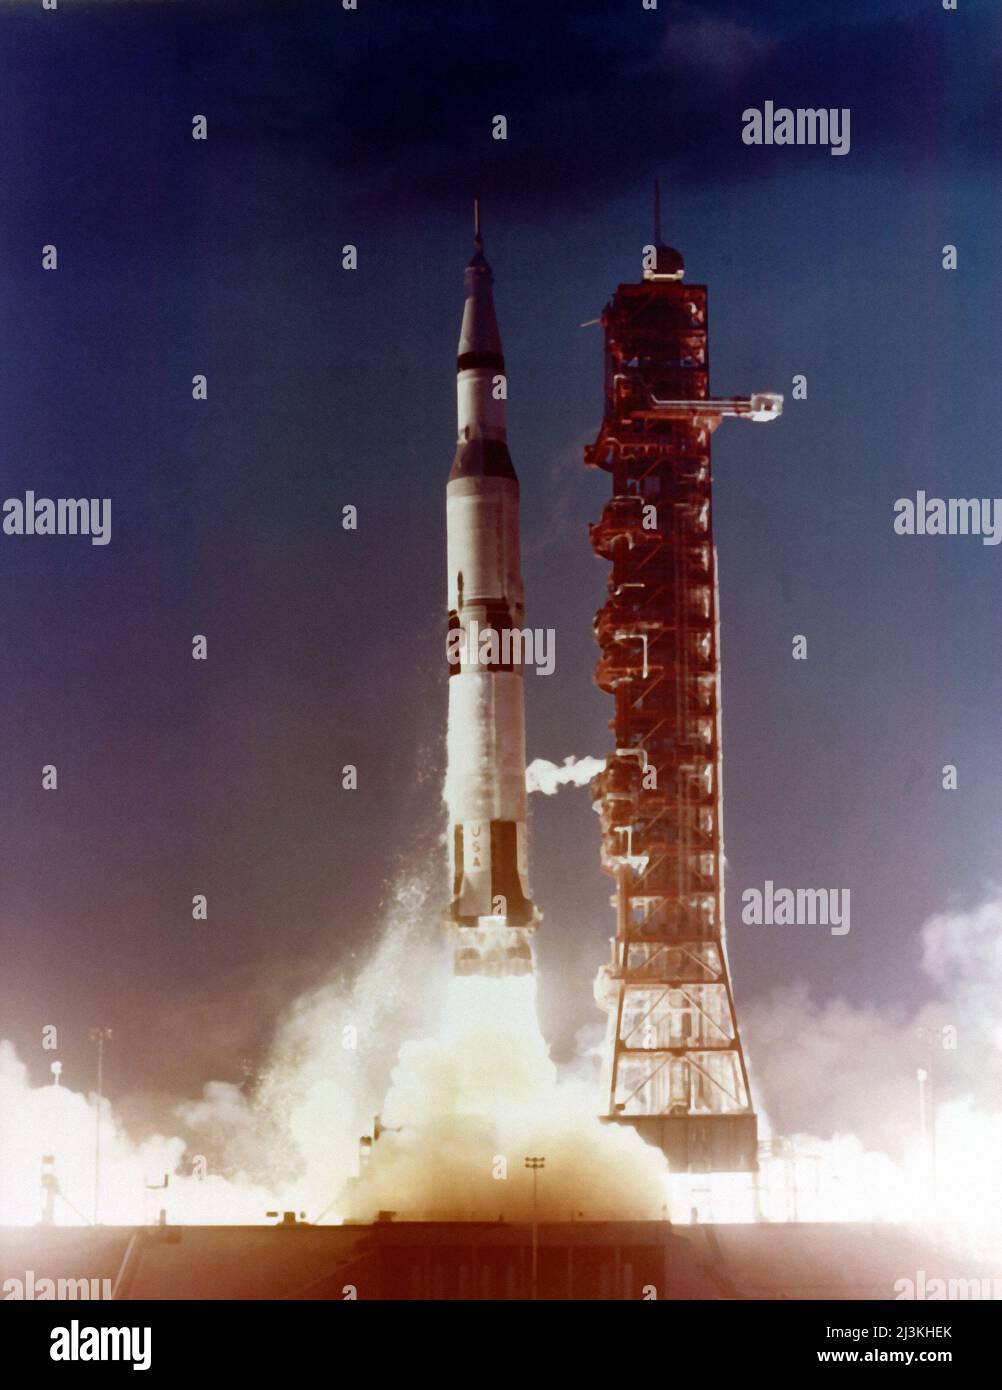 On November 9, 1967, Apollo 4, the first test flight of the Apollo/Saturn V space vehicle, was launched from Kennedy Space Center Launch Complex 39. This was an unmanned test flight intended to prove that the complex Saturn V rocket could perform its requirements. All three stages separated successfully and their engines performed as planned. The third stage also restarted in orbit, which was a requirement for lunar missions. At the end of the flight, the unmanned Apollo spacecraft reentered and proved that it could survive the intense heat generated during a high-speed return from the moon. Stock Photo